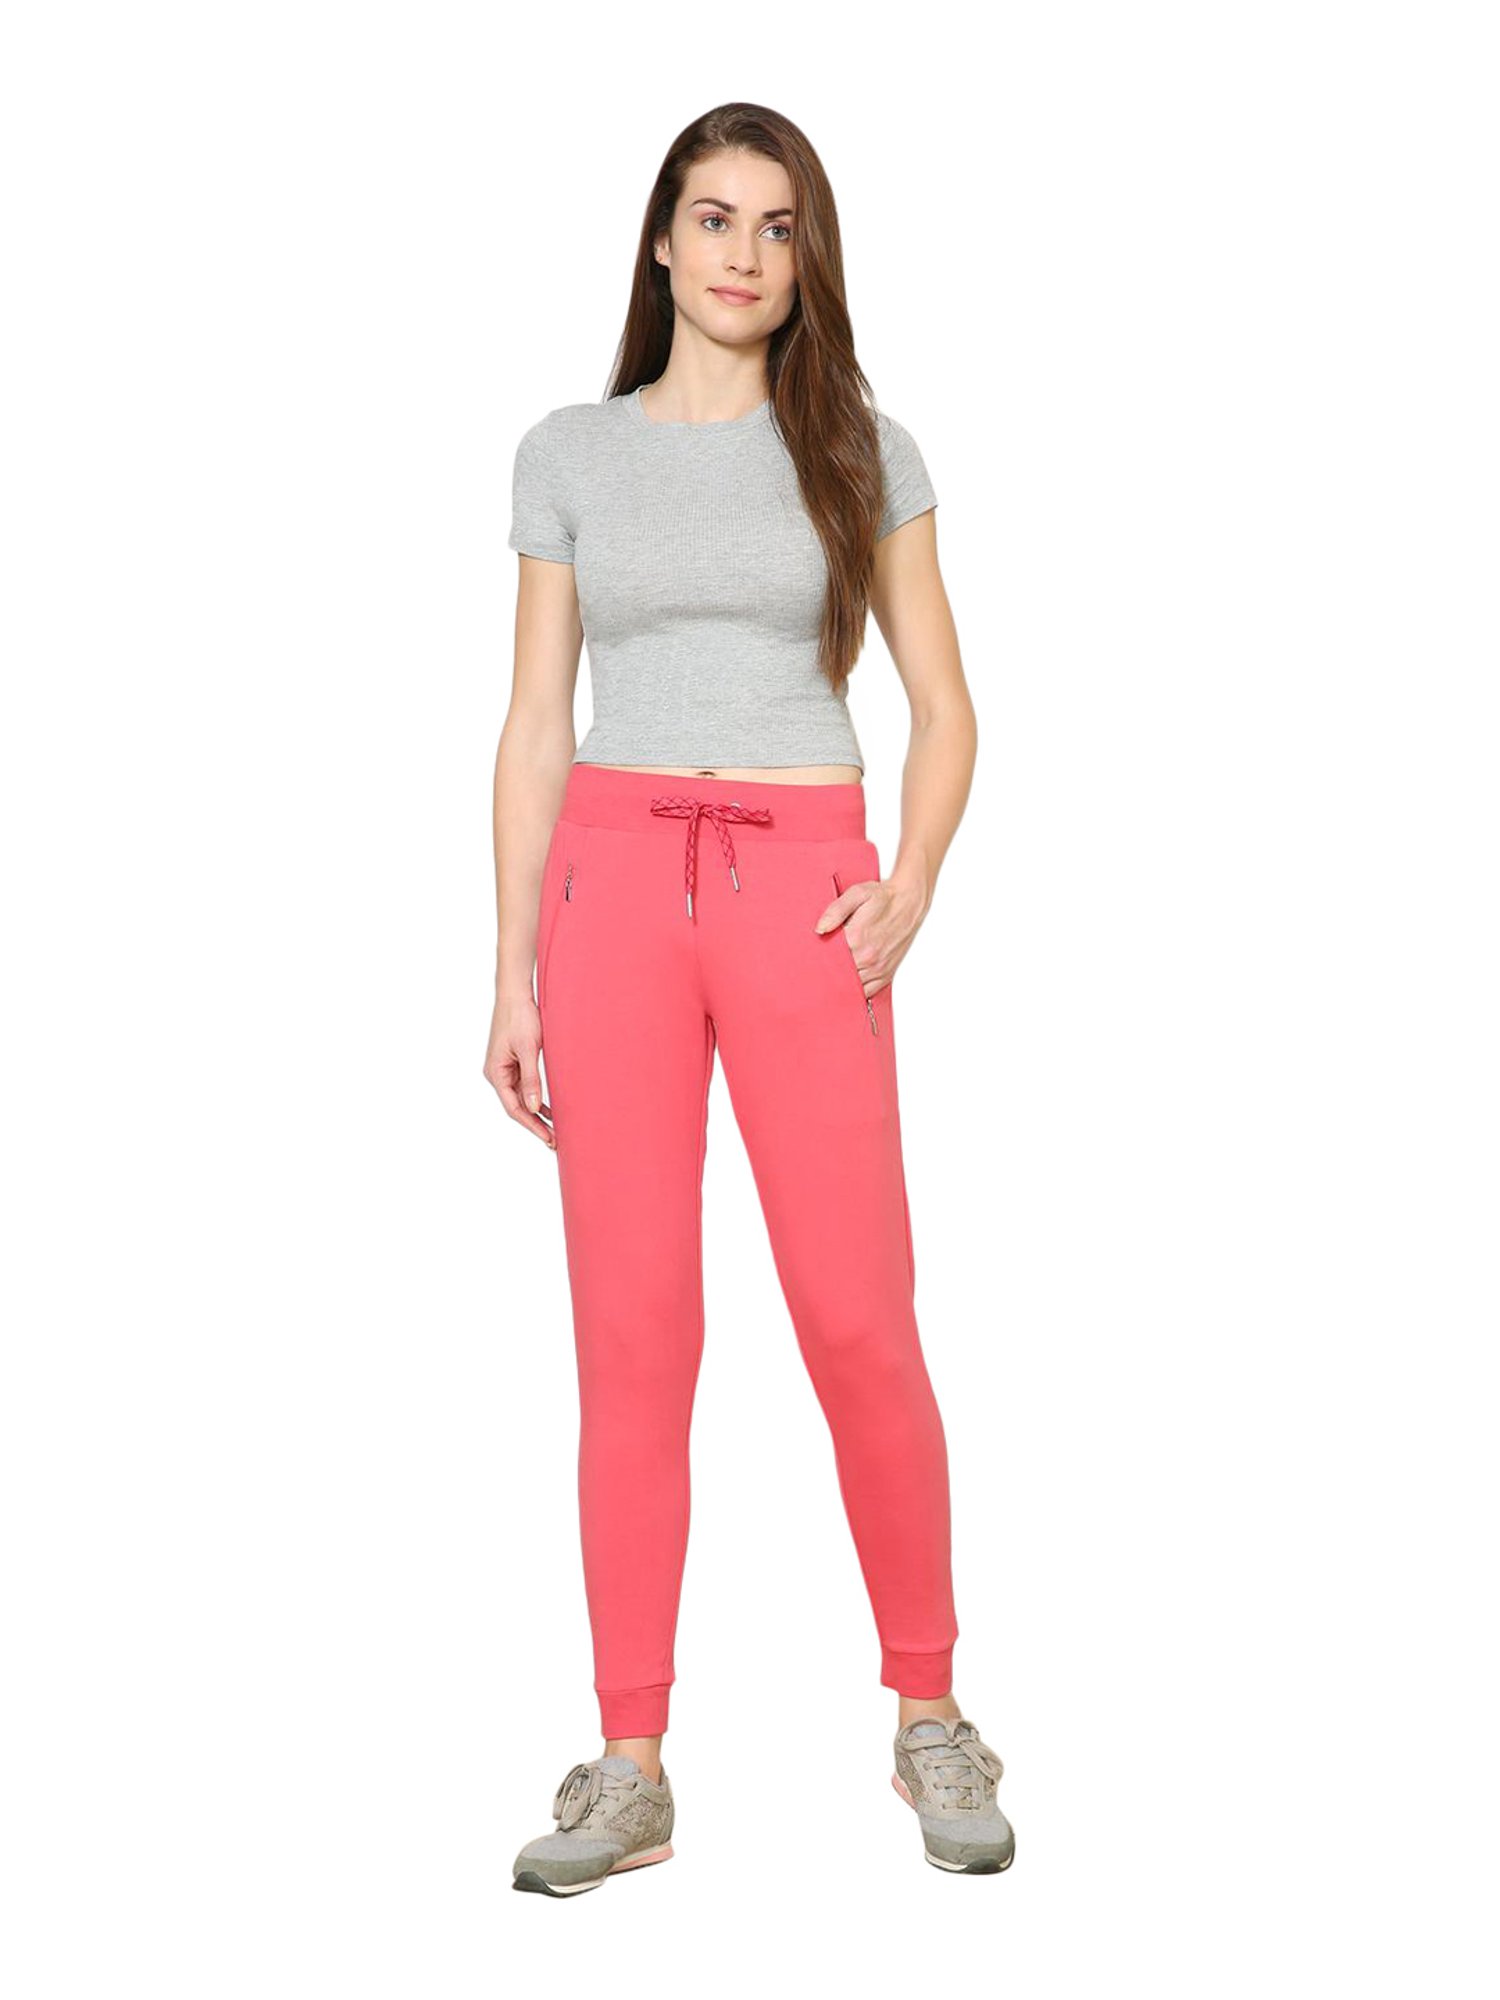 Buy Girls Pink Solid Slim Fit Trousers Online  680260  Allen Solly